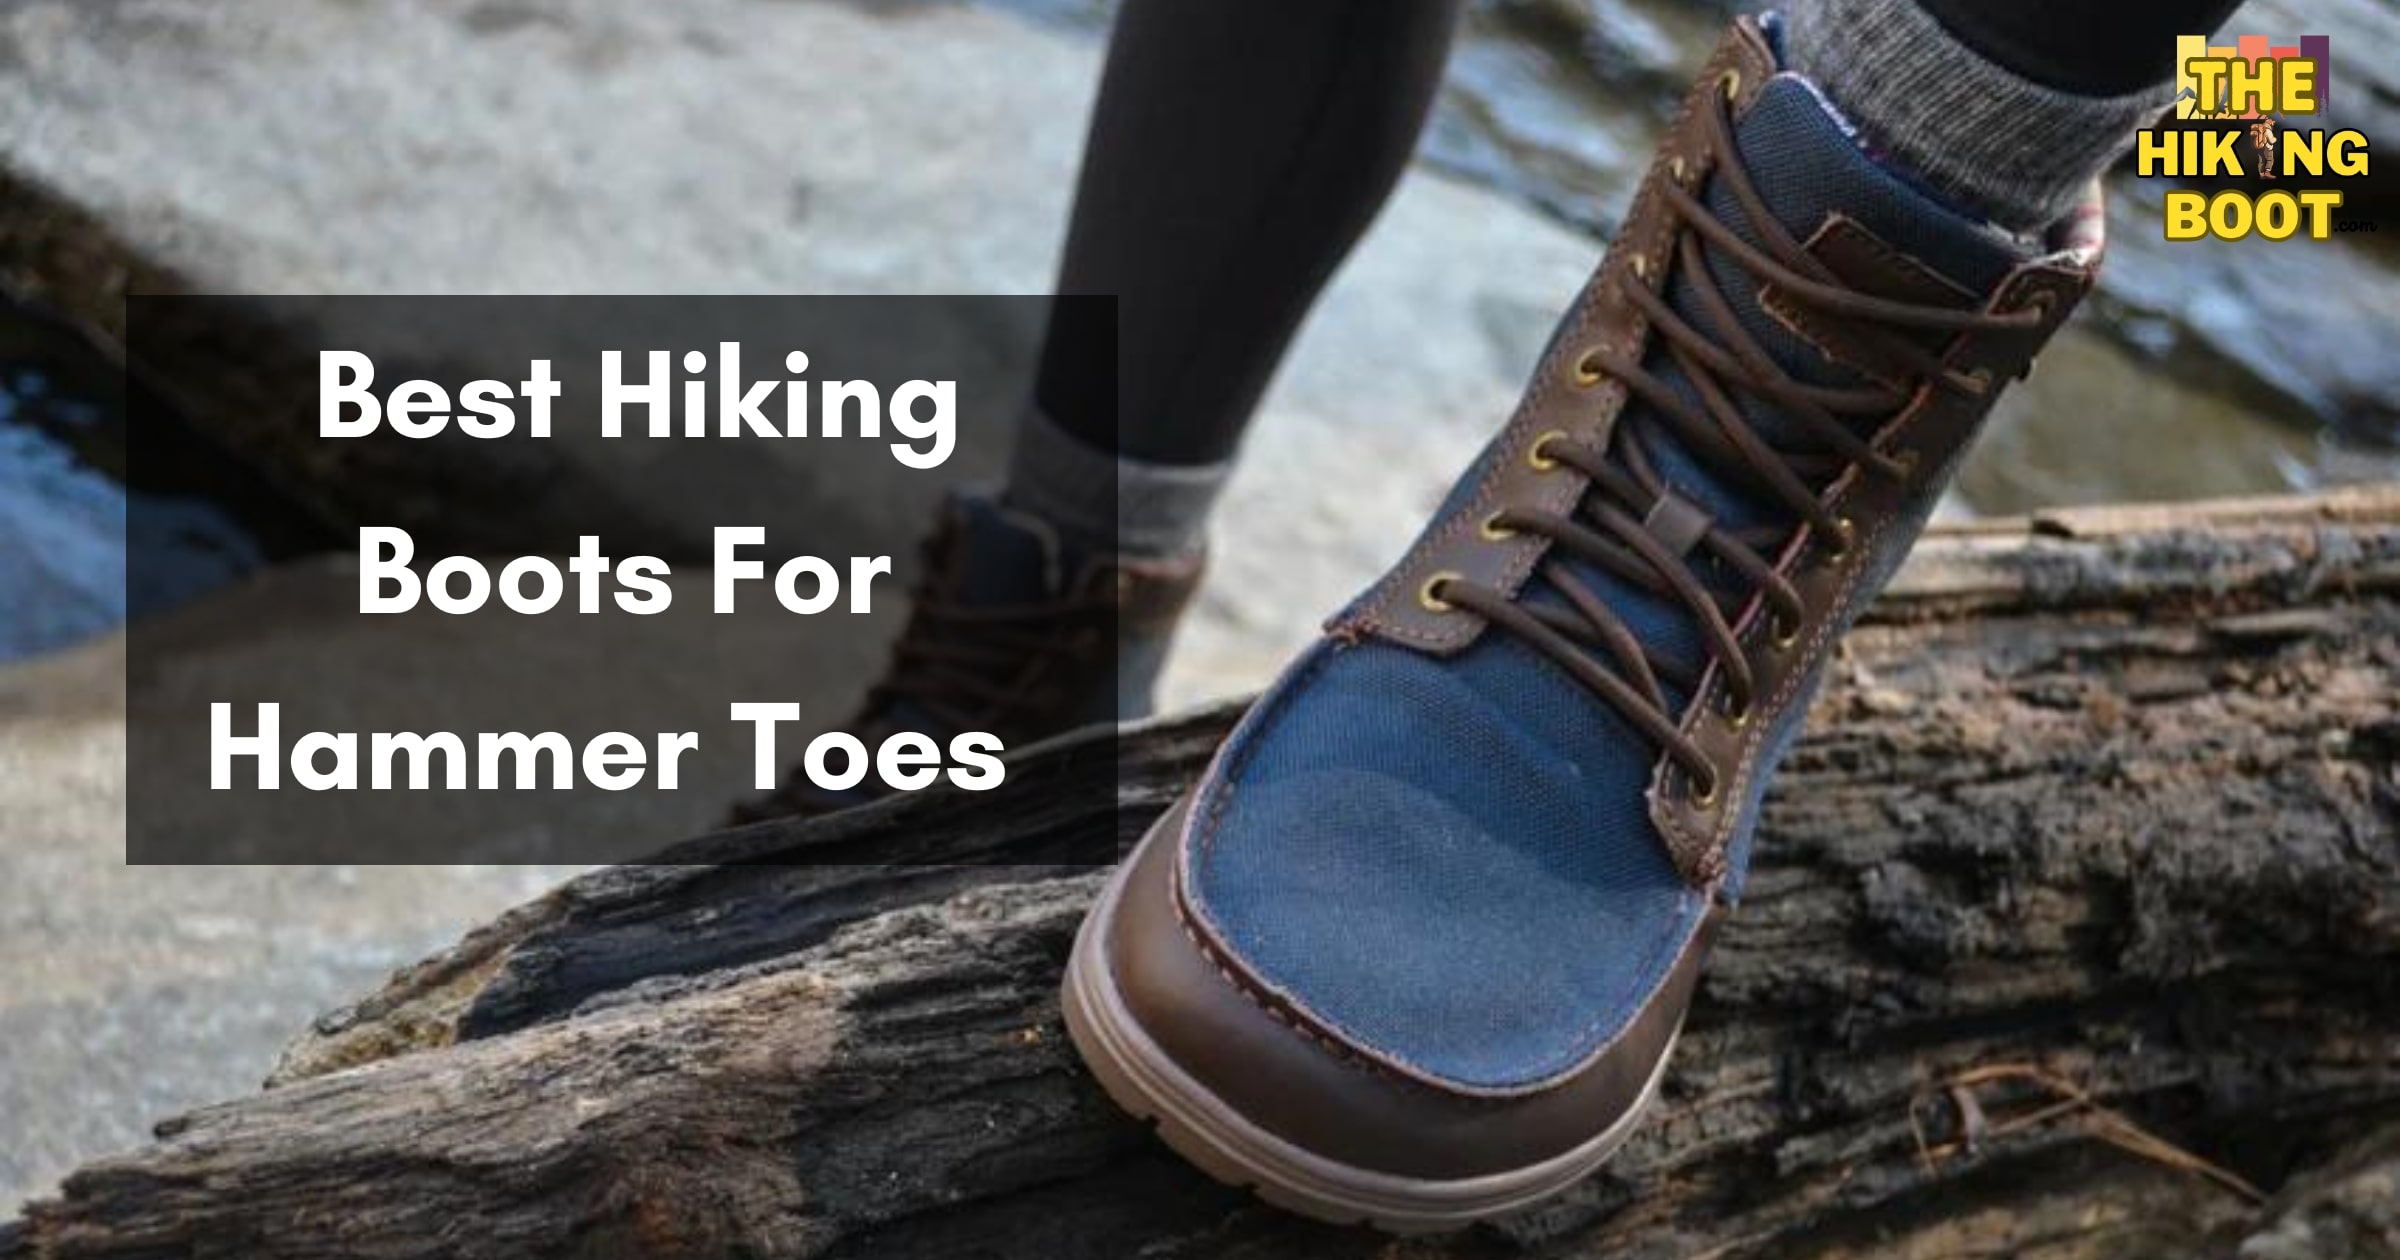 Top 5 Best Hiking Boots For Hammer Toes – The Hiking Boot